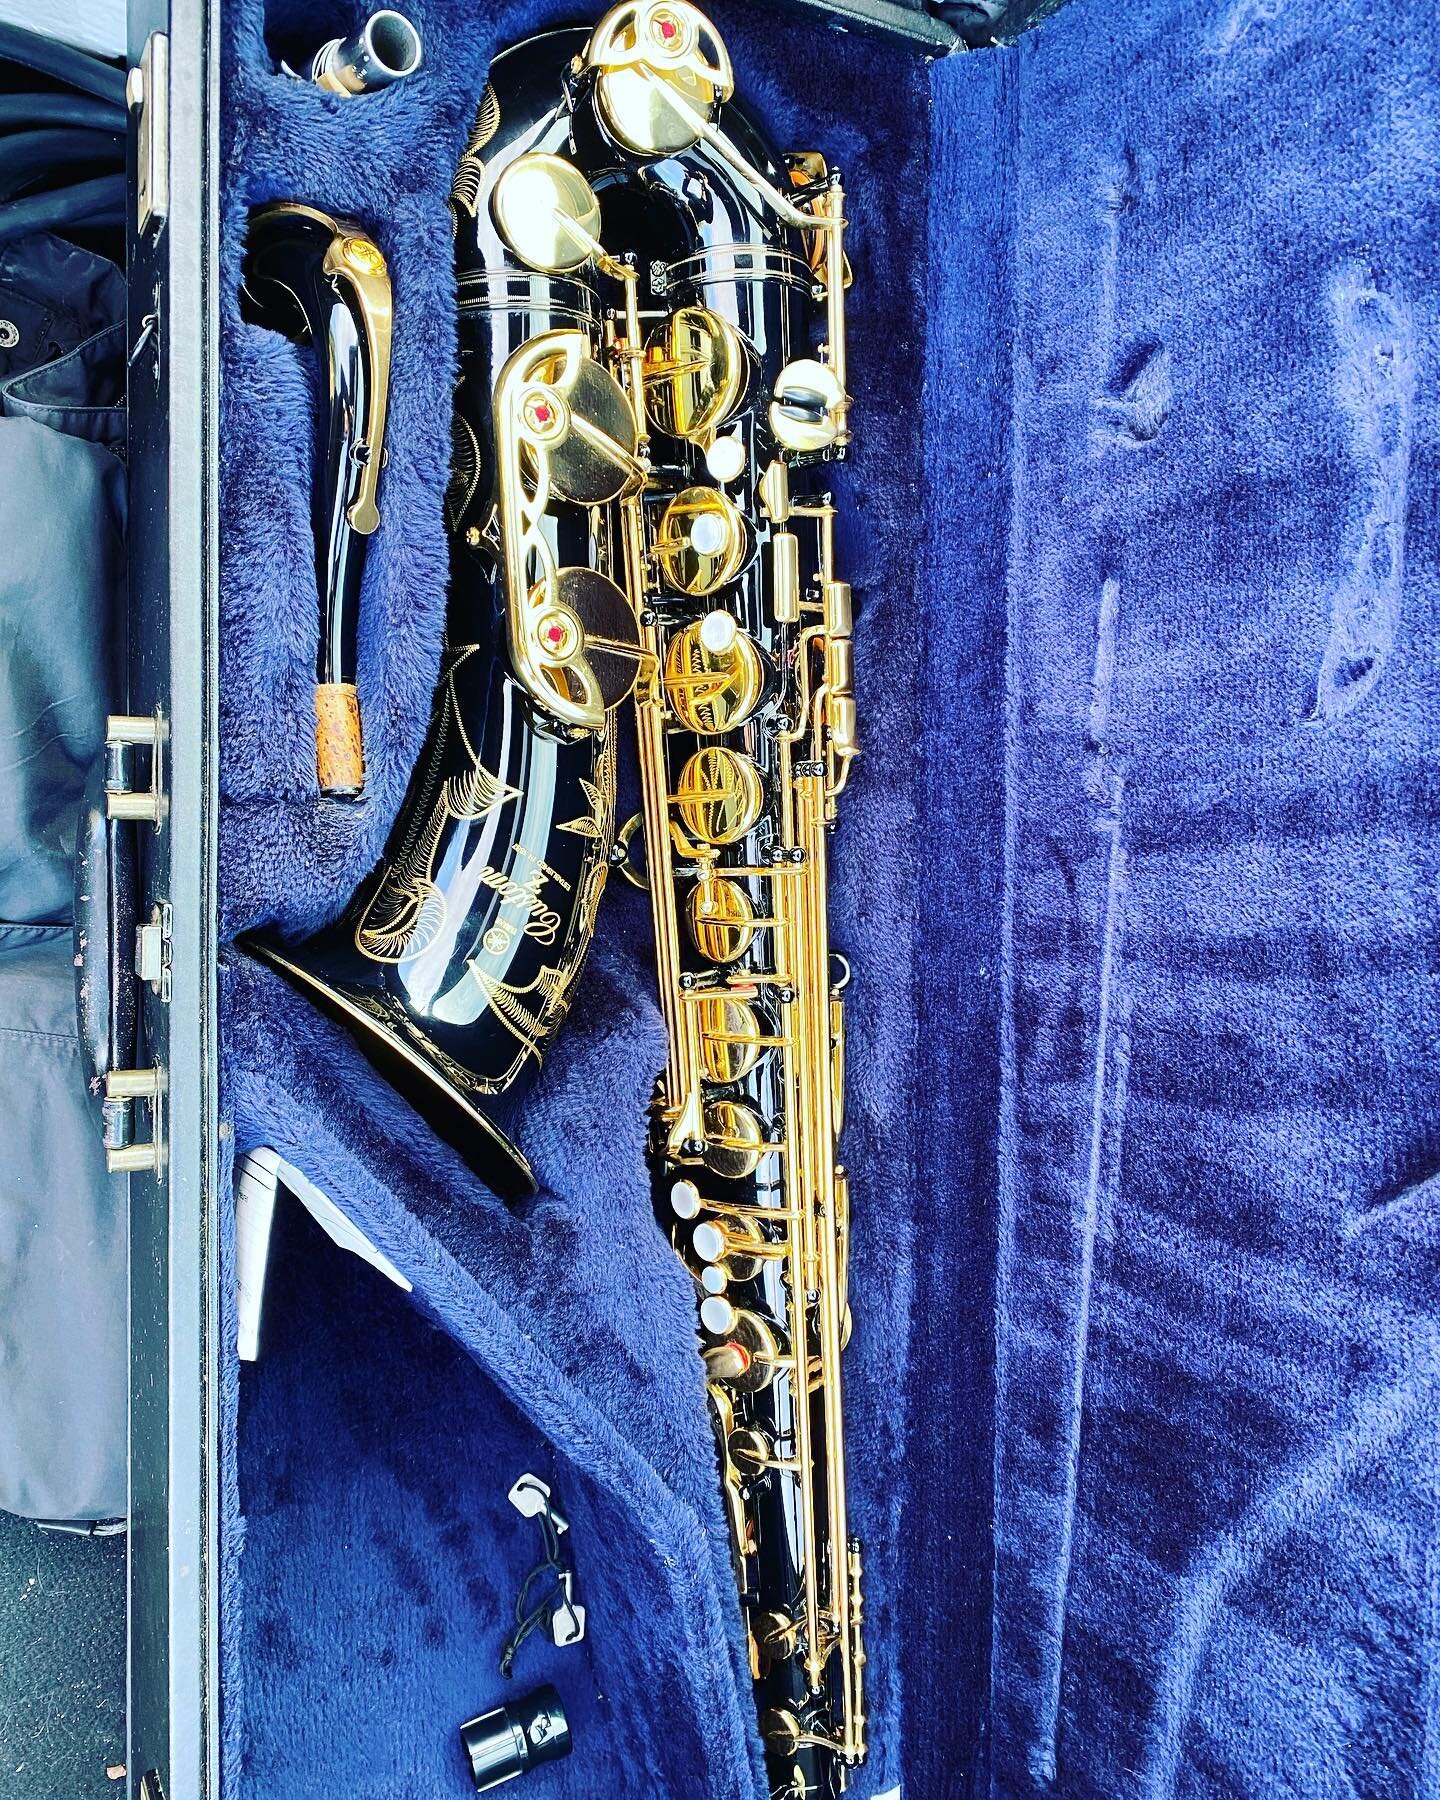 Really excited about being the owner of a YTS-82Z (Black!) Custom Z Tenor Saxophone!

I&lsquo;ve been working at getting my Reference 54 Tenor sound to be brighter for being a dark-timbred horn. When I got that sax back in my later-high school days, 